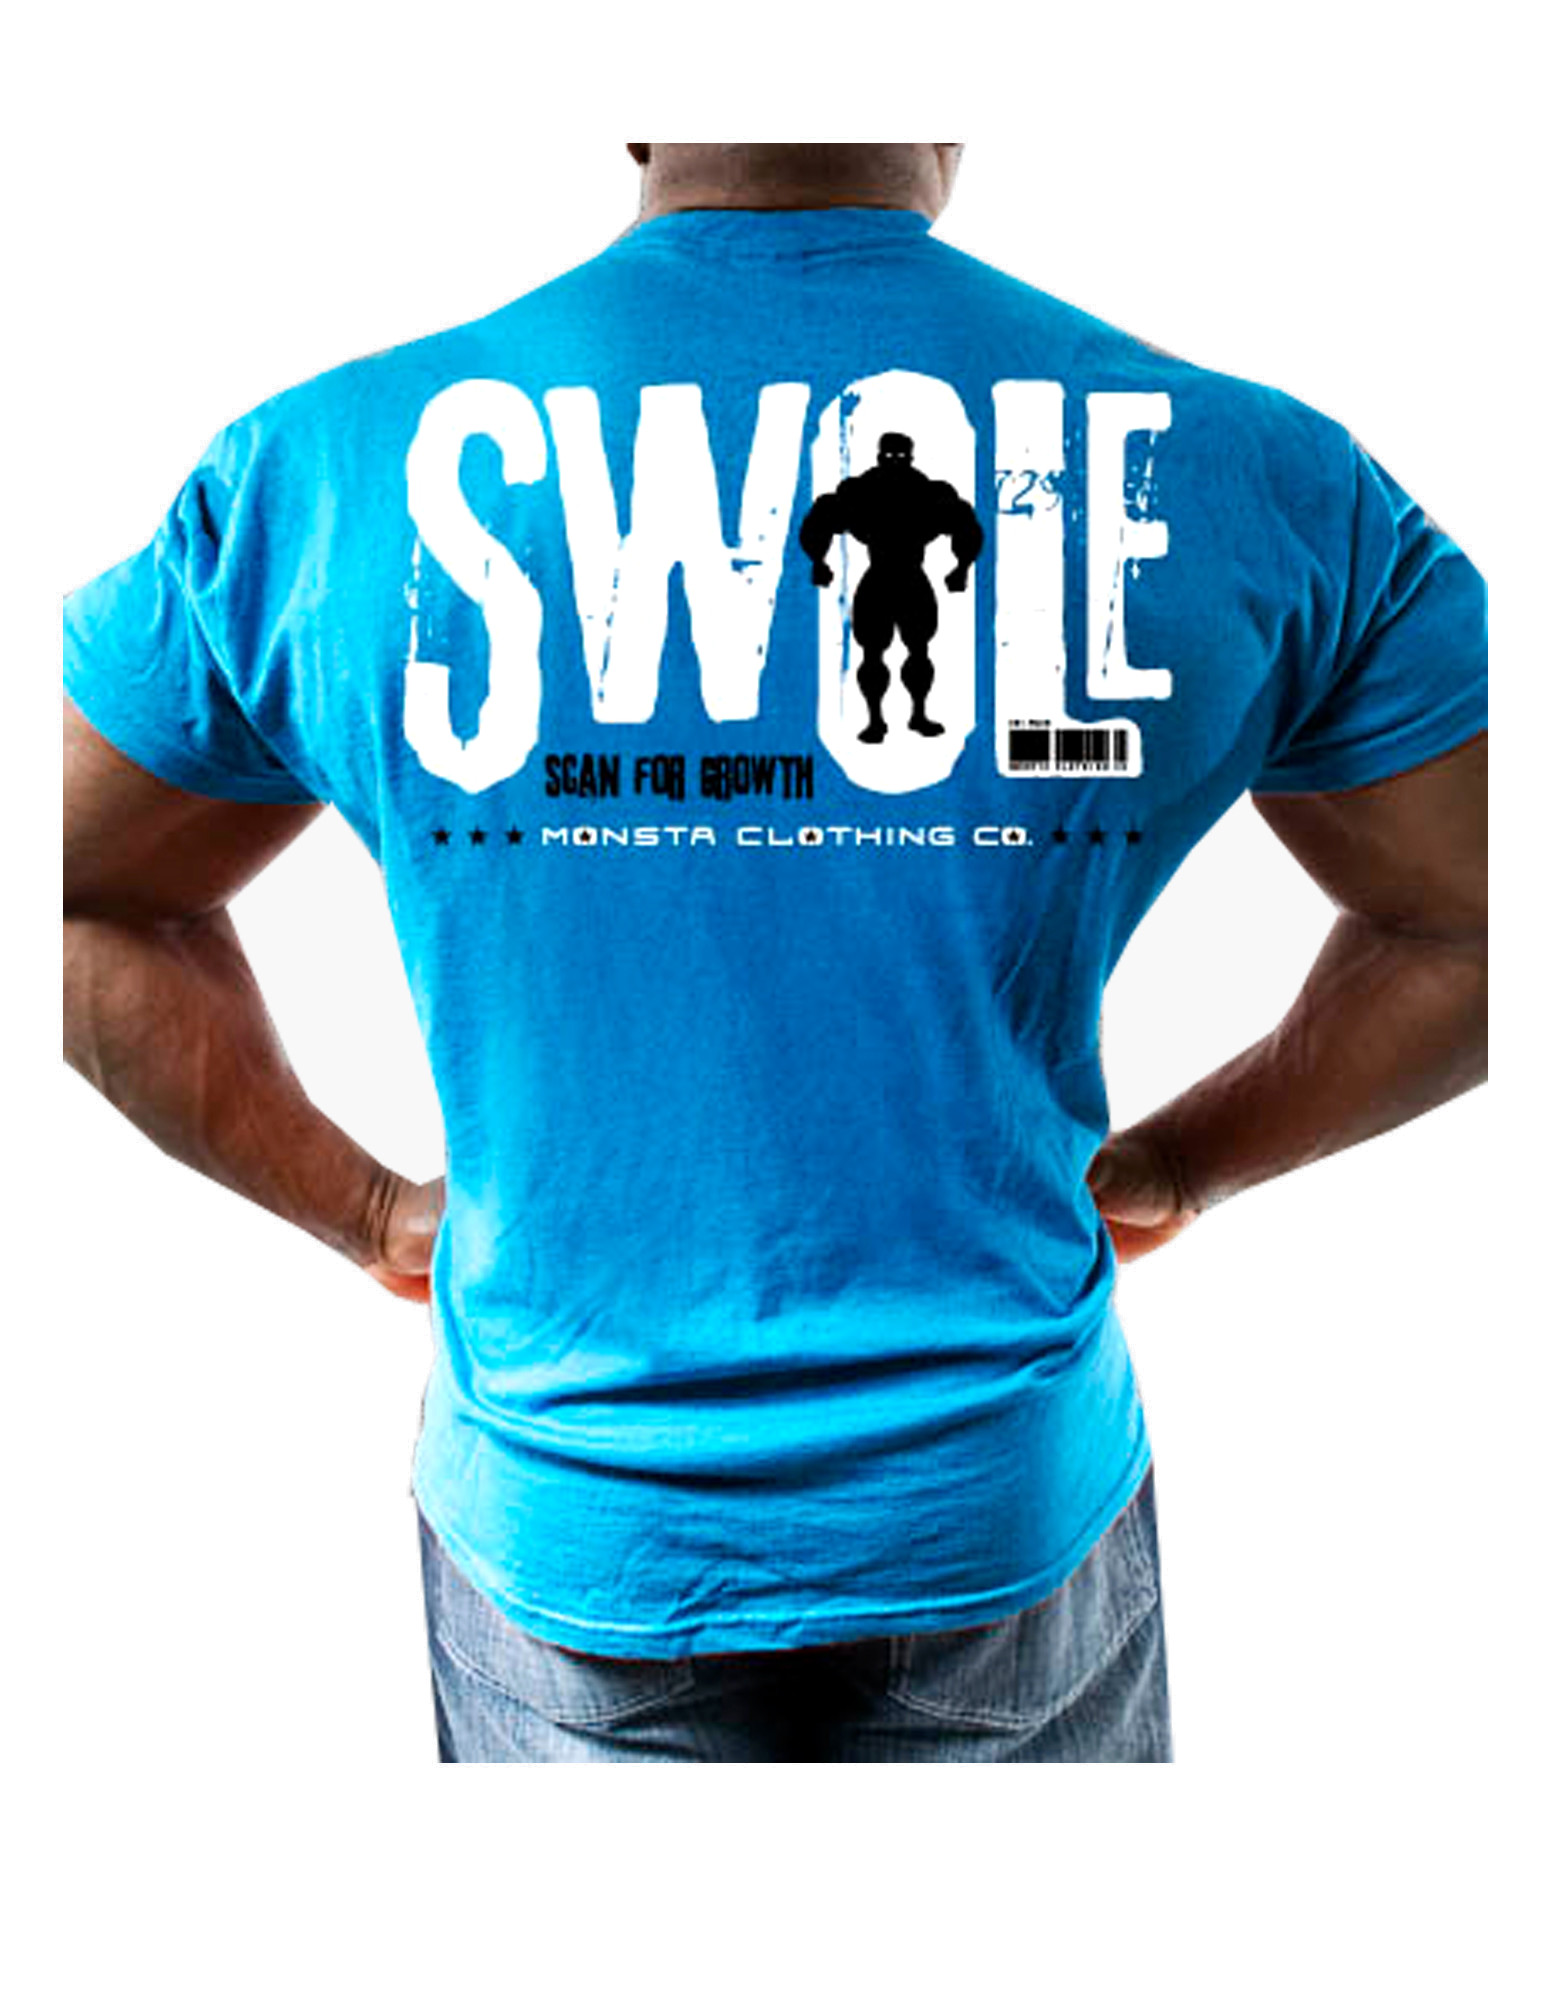 Swole-Scan for Growth-81 T-Shirt 2014 by MONSTA CLOTHING CO (colour: blue)